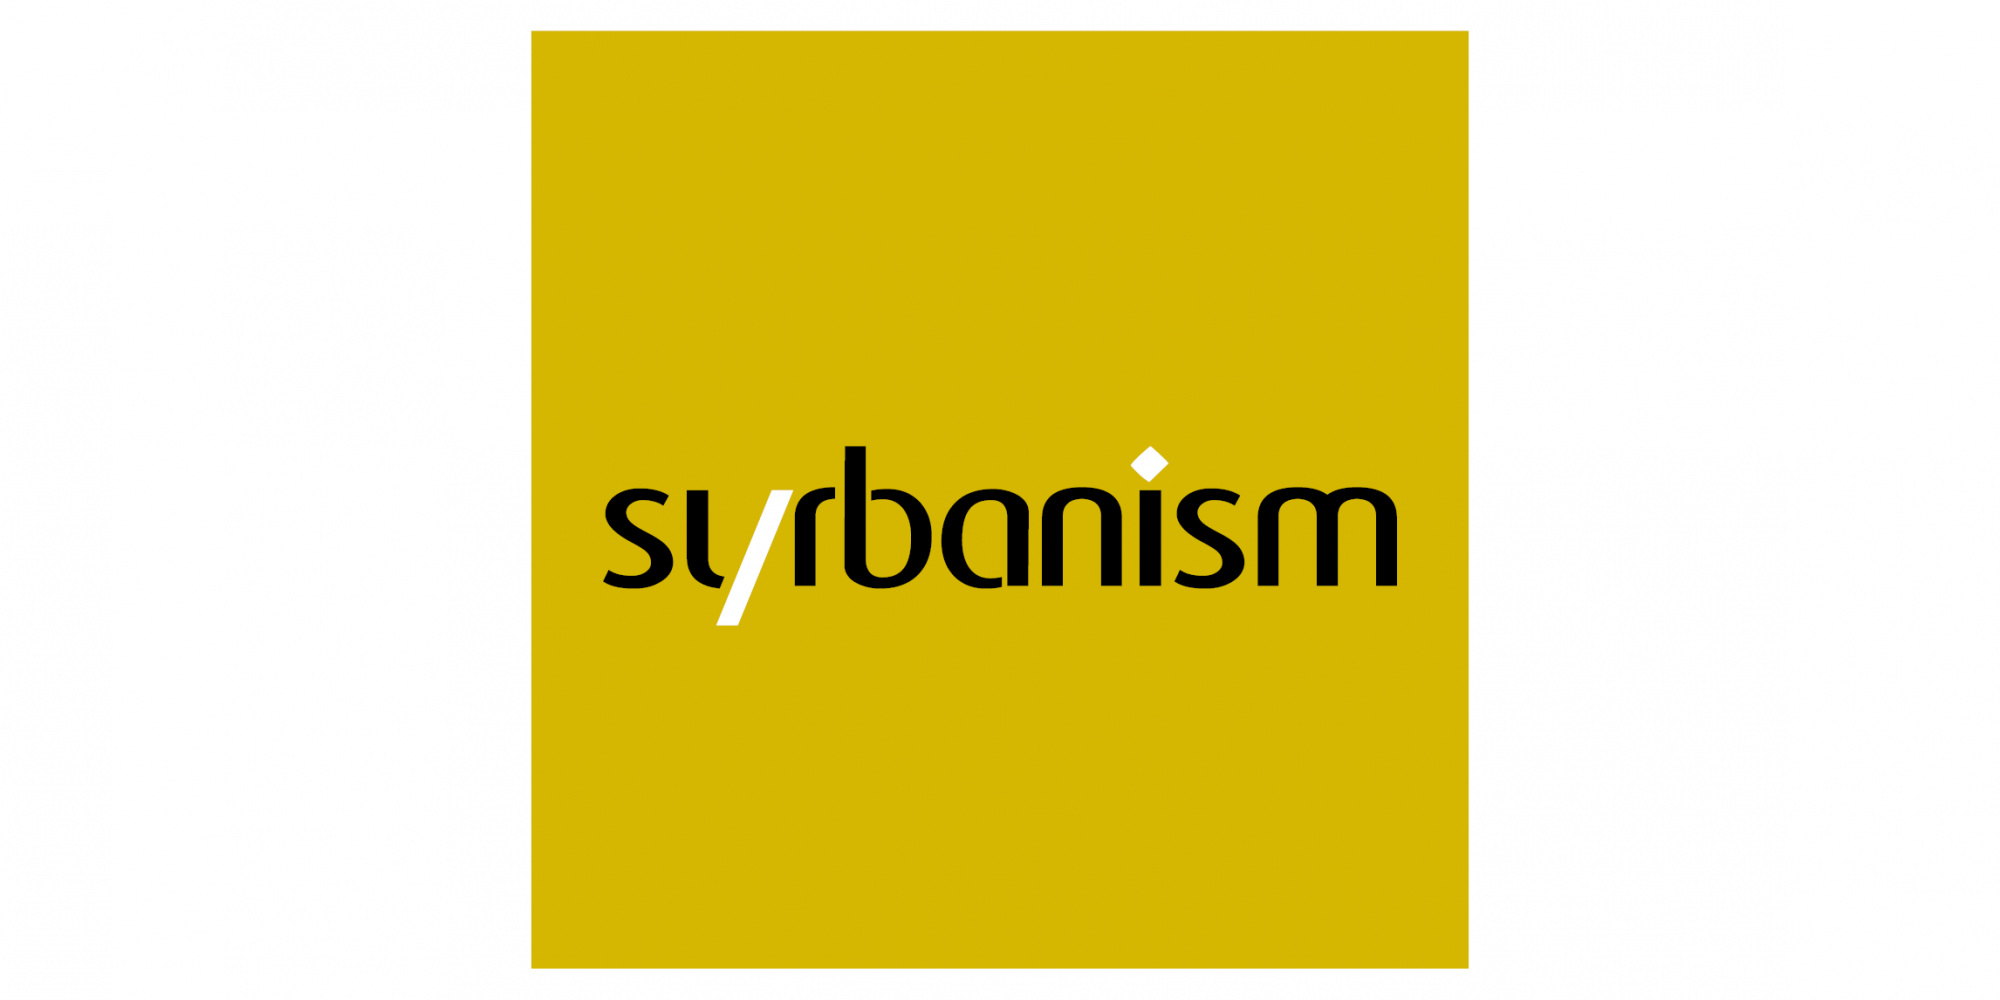 The non-profit organization “Syrbanism” aims to include the local people in rebuilding Syrian cities. Picture: Syrbanism